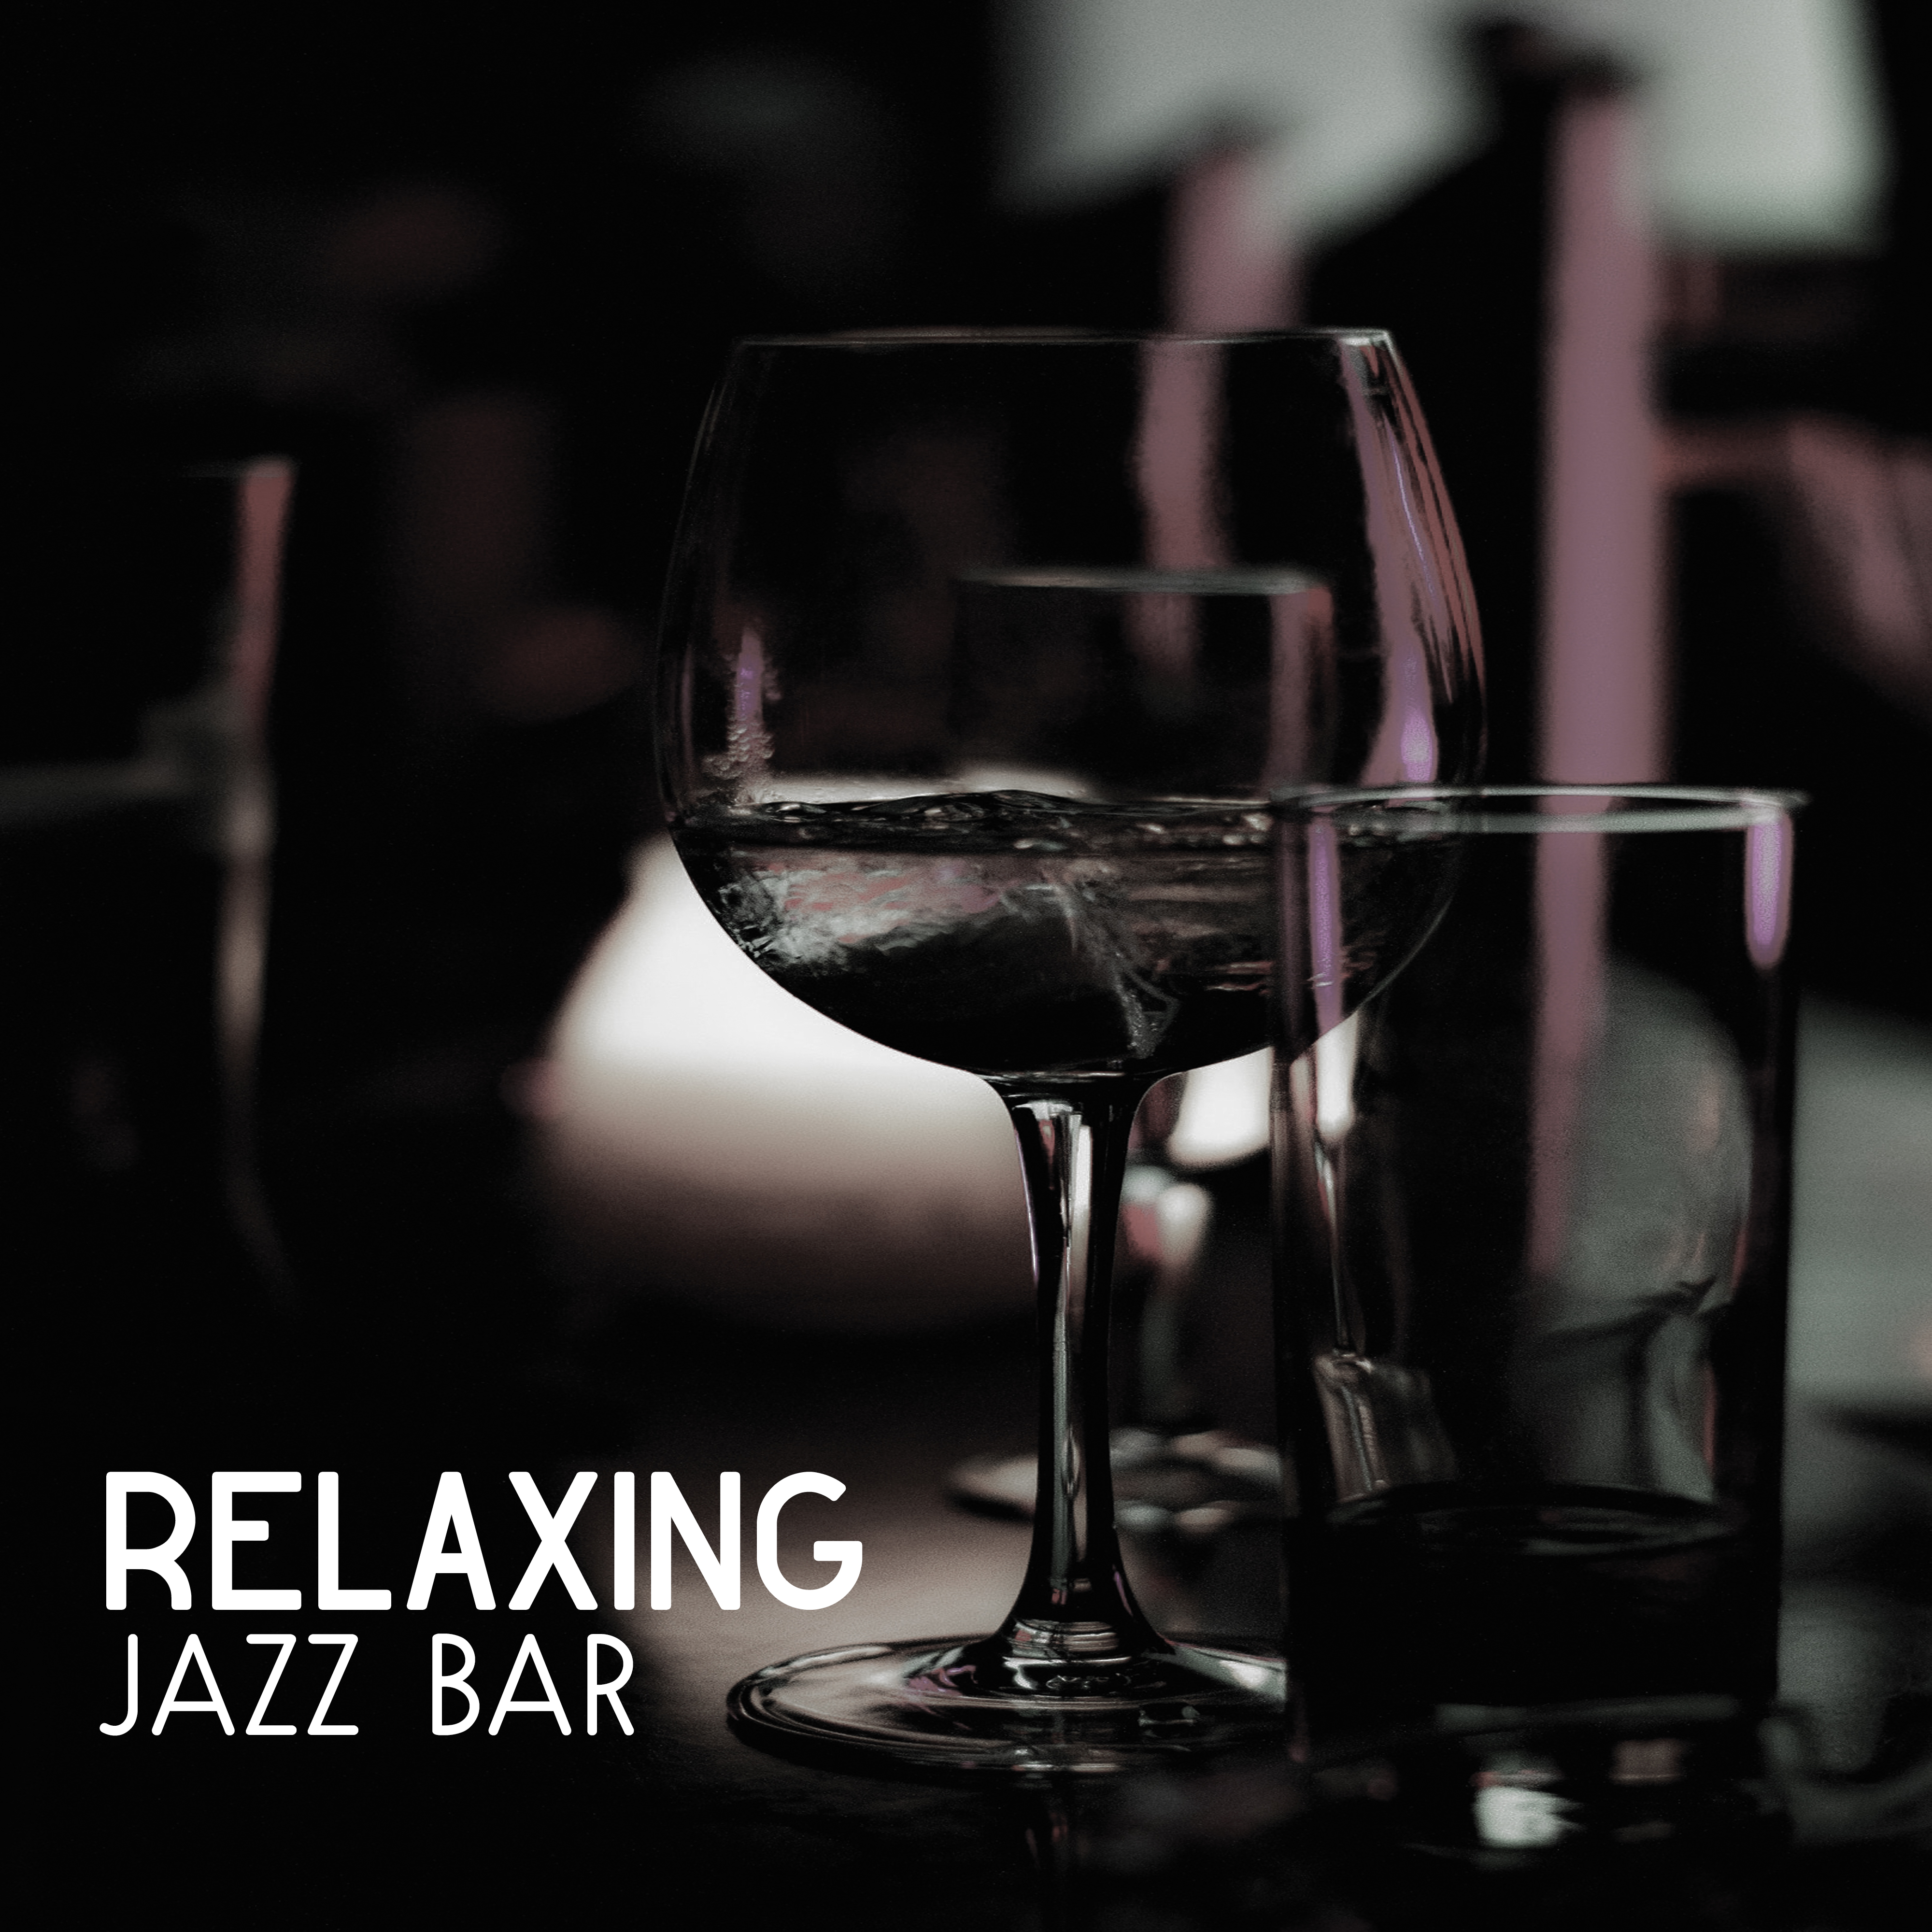 Relaxing Jazz Bar – Night Sounds, Instrumental Jazz, Pure Relaxation, Piano Bar, Soft Jazz at Night